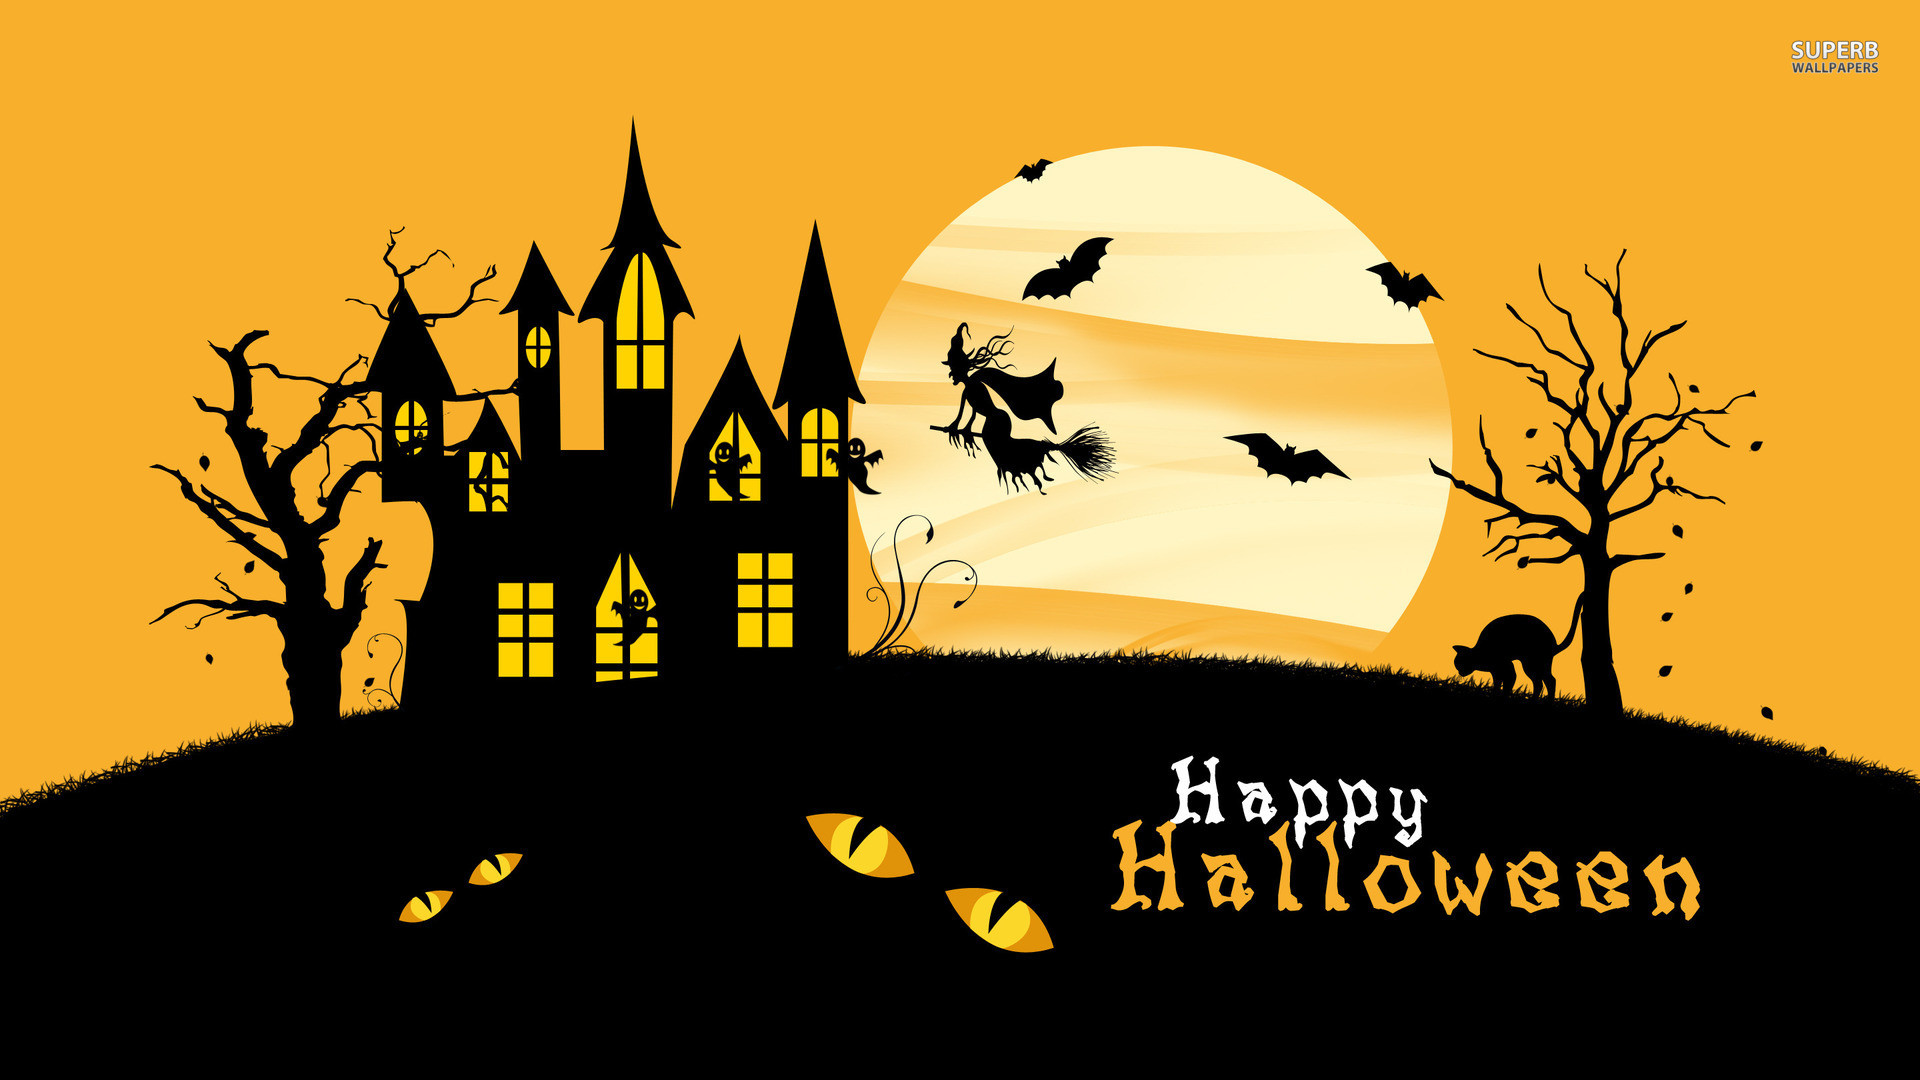 1920x1080 Related To Halloween Wallpaper Background. Halloween Wallpapers Hd  Resolution